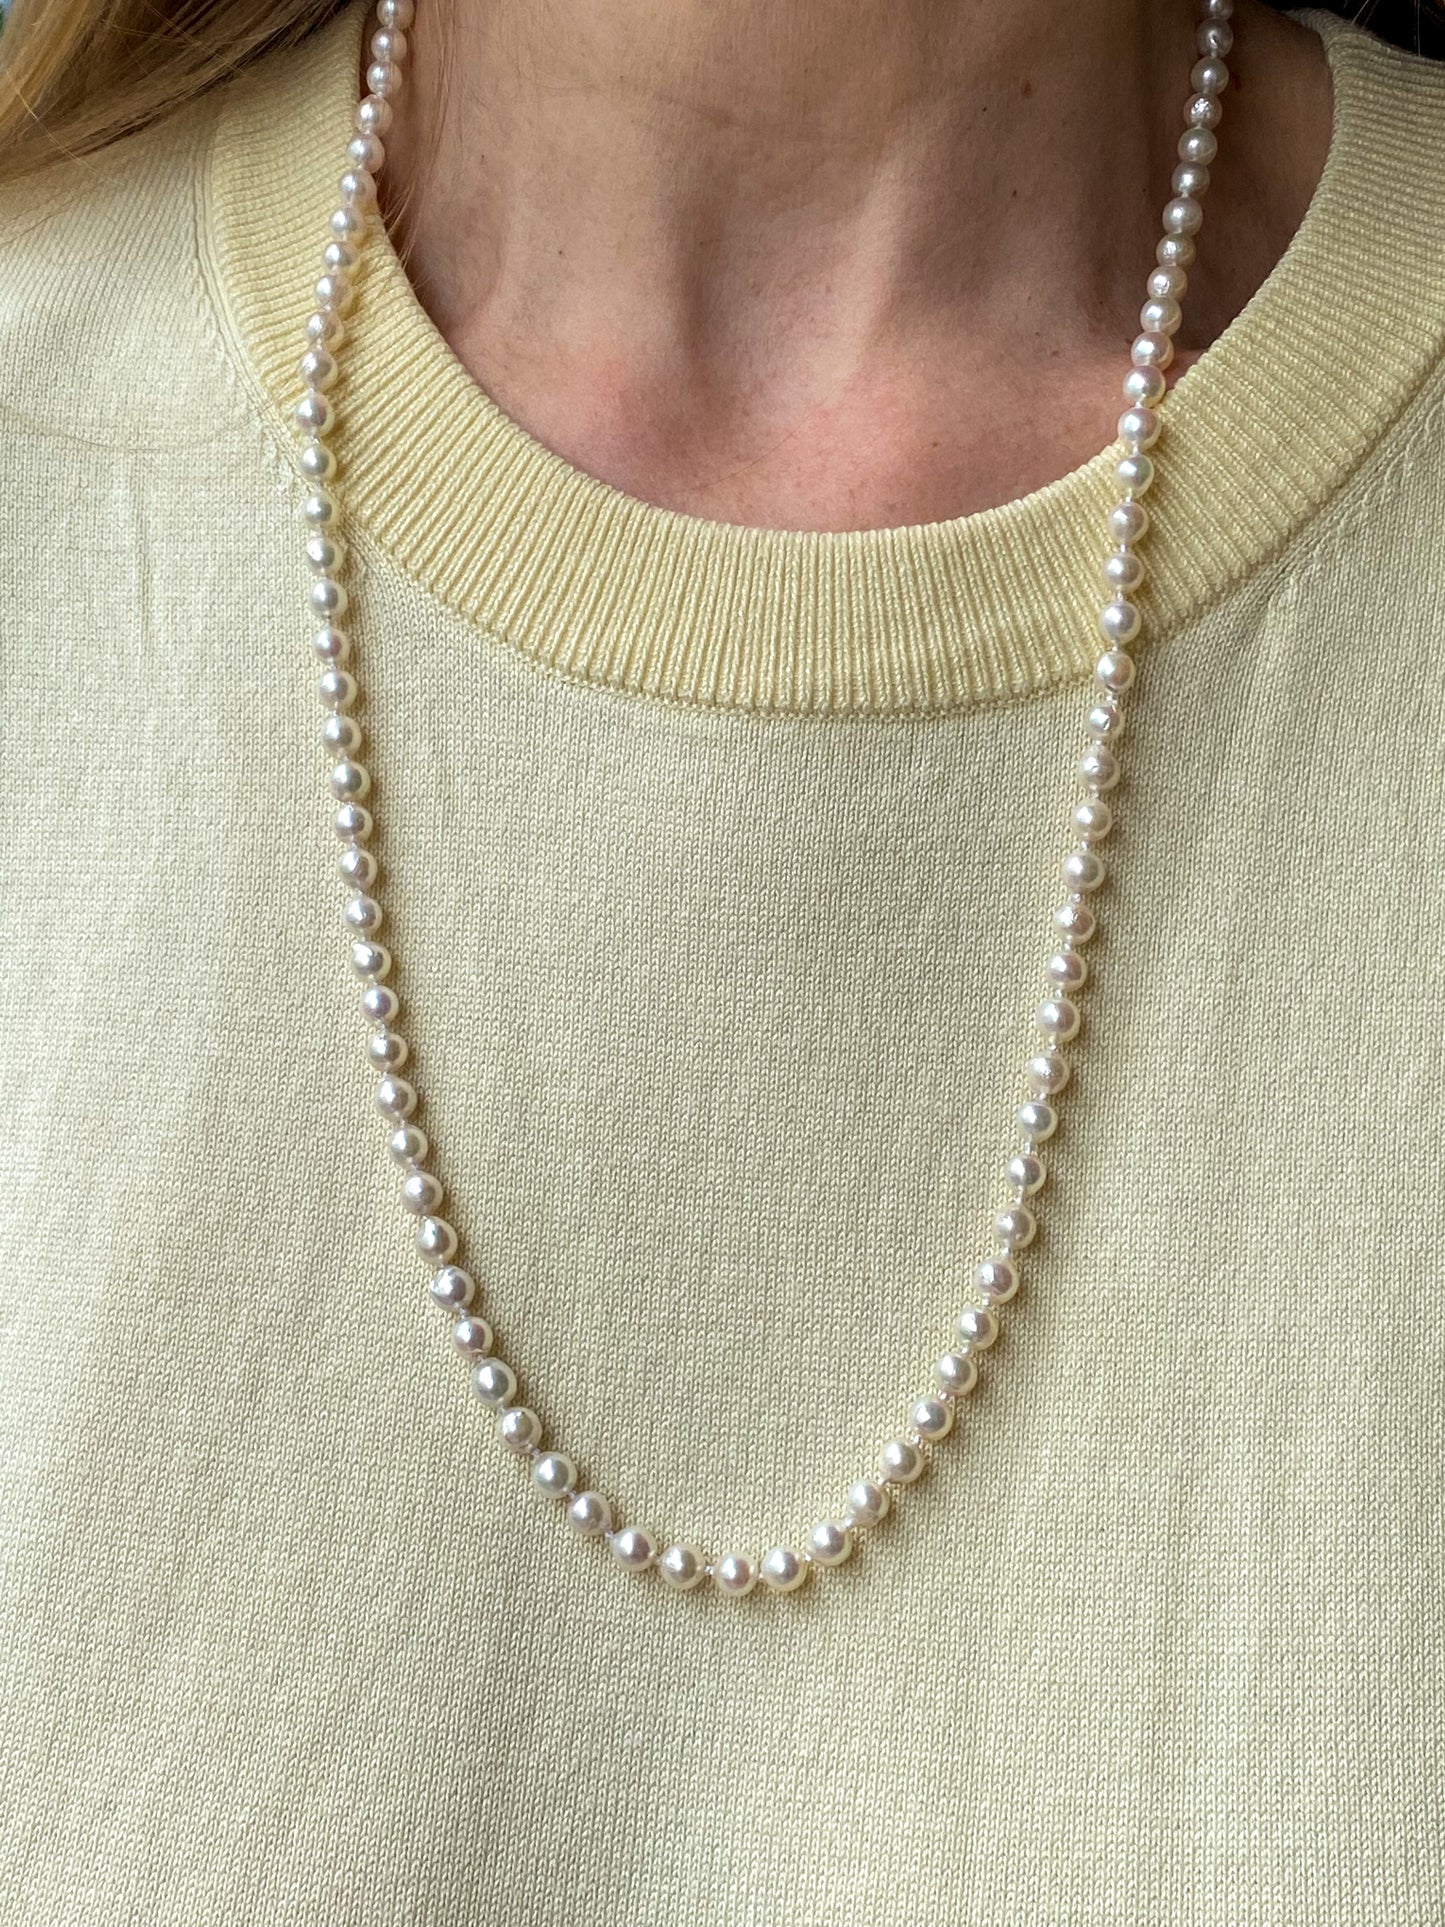 9ct Gold 28" Akoya Cultured Pearl Necklace - John Ross Jewellers